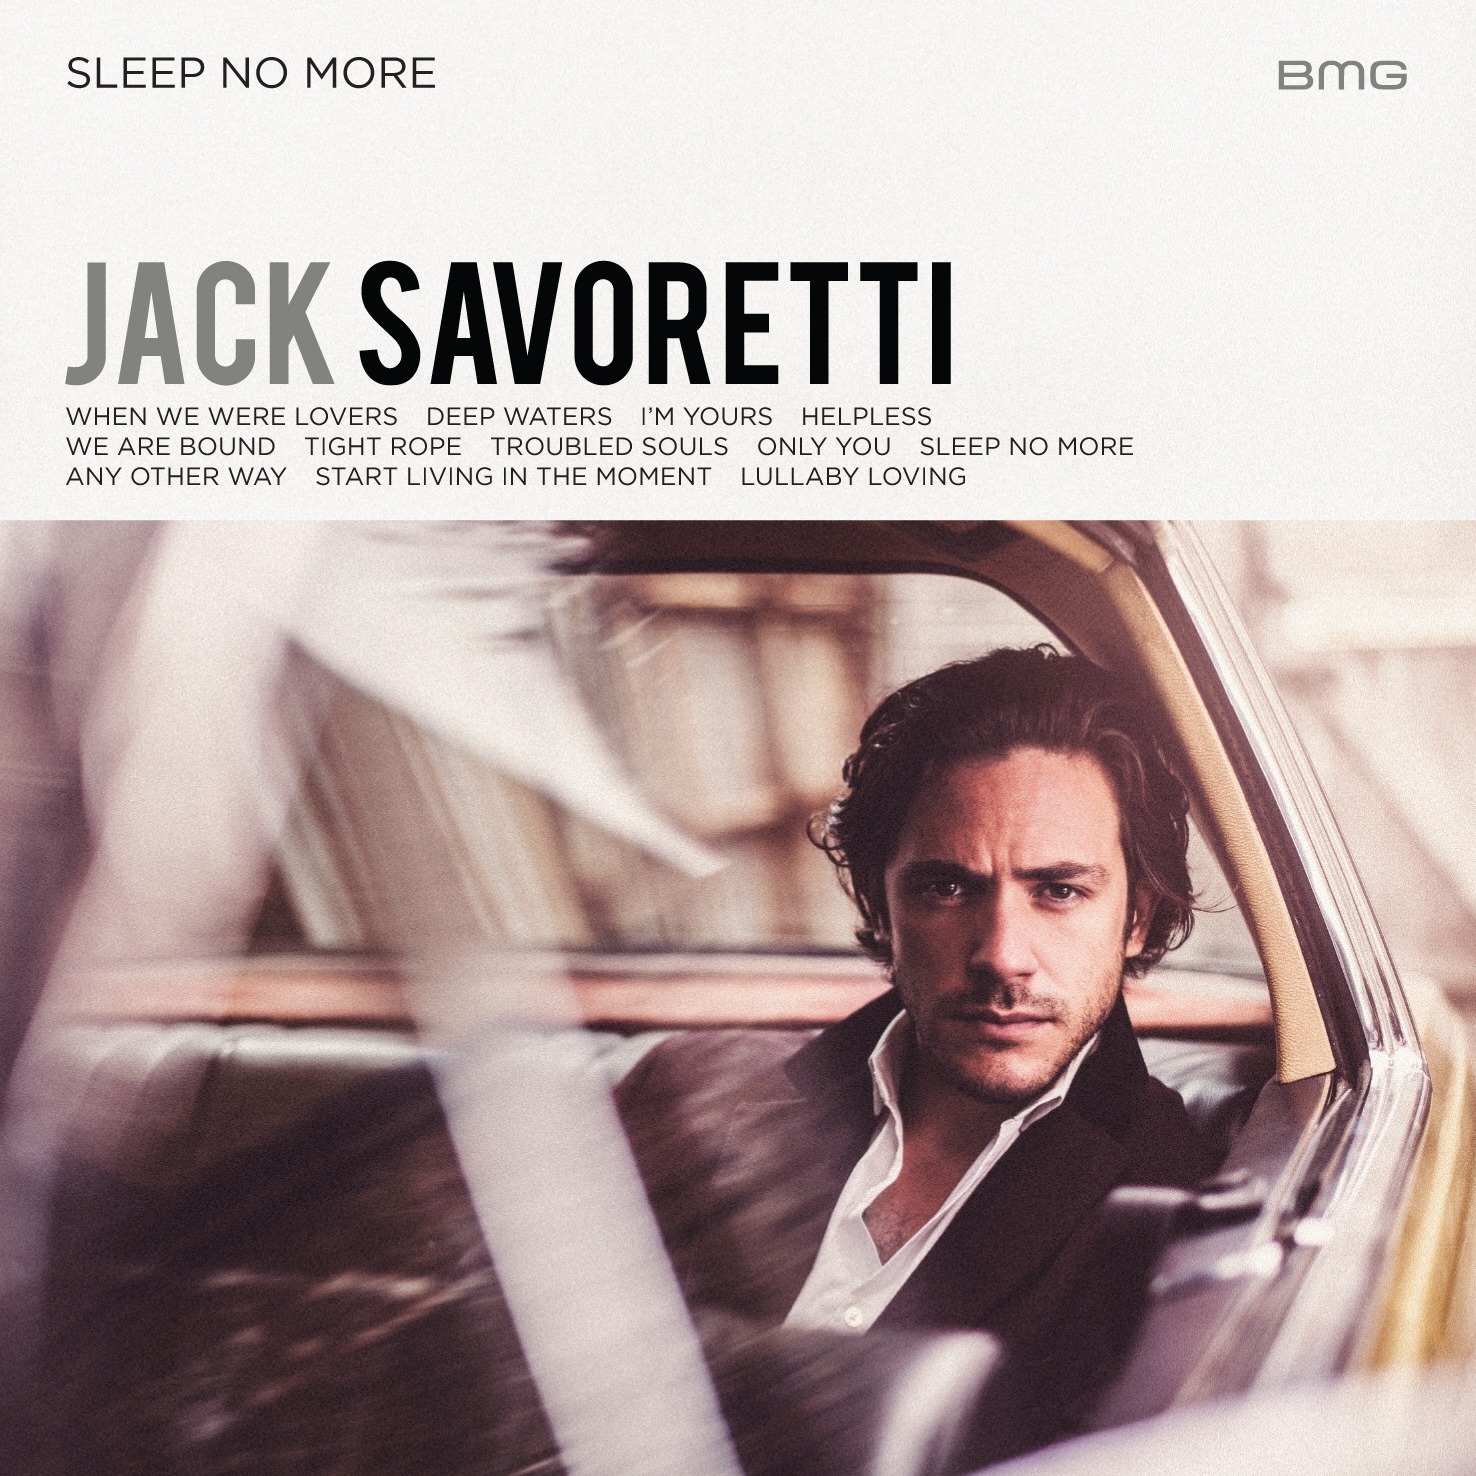 who is supporting jack savoretti on tour